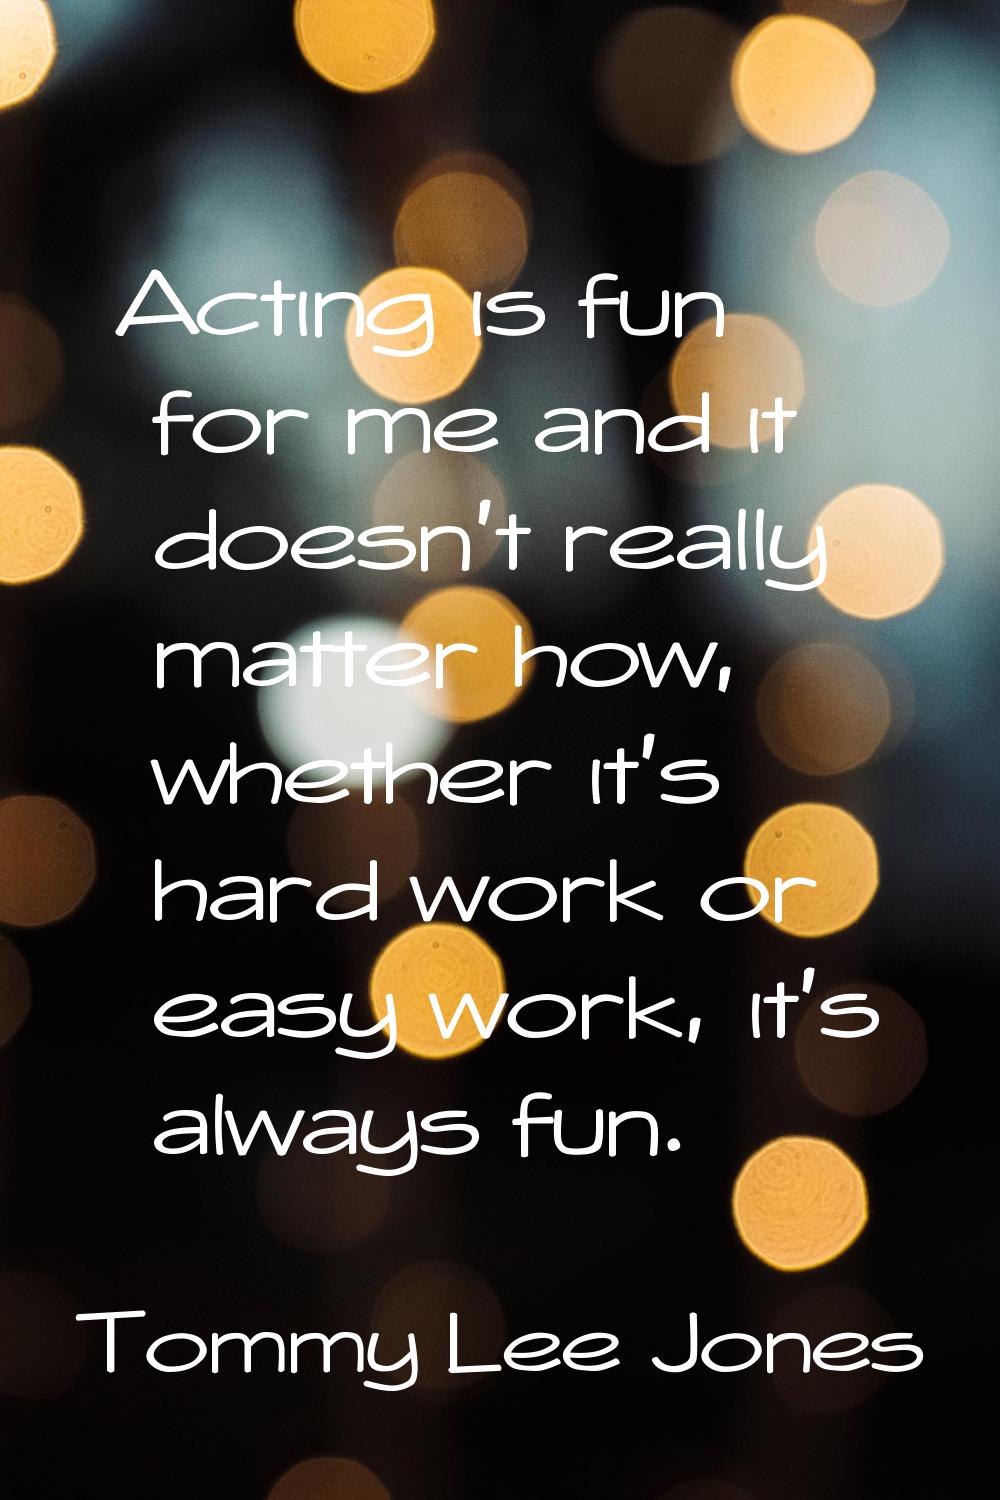 Acting is fun for me and it doesn't really matter how, whether it's hard work or easy work, it's al